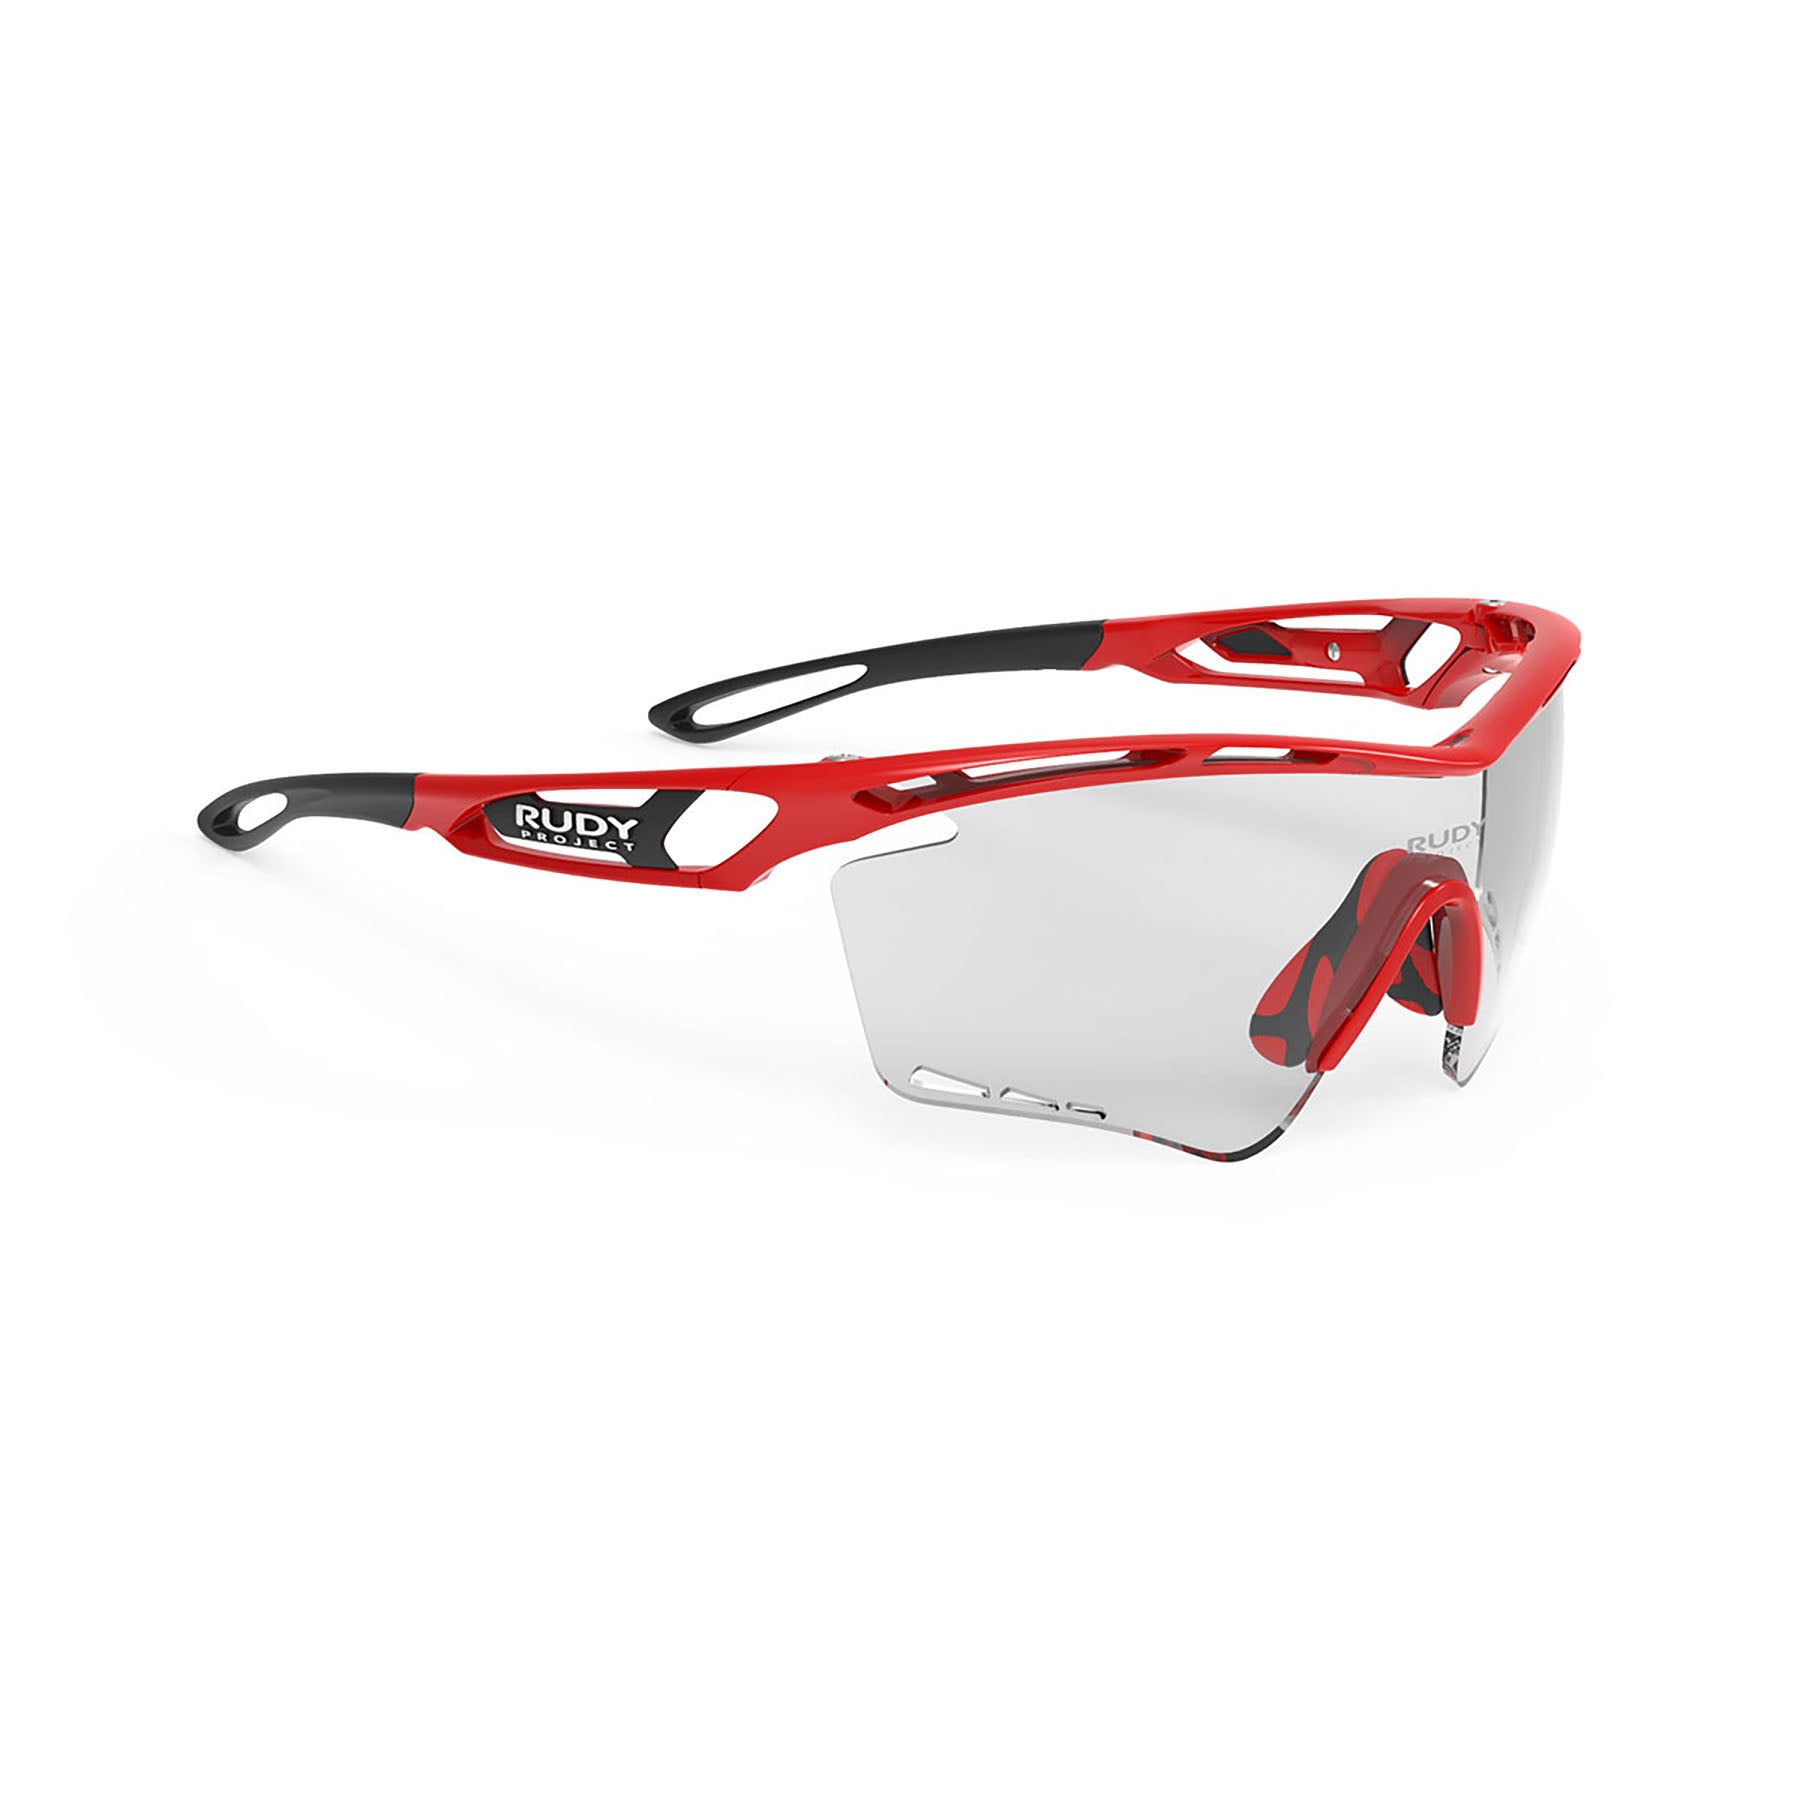 Tralyx XL Fire Red Frame with ImpactX Photochromic 2 Black Lenses